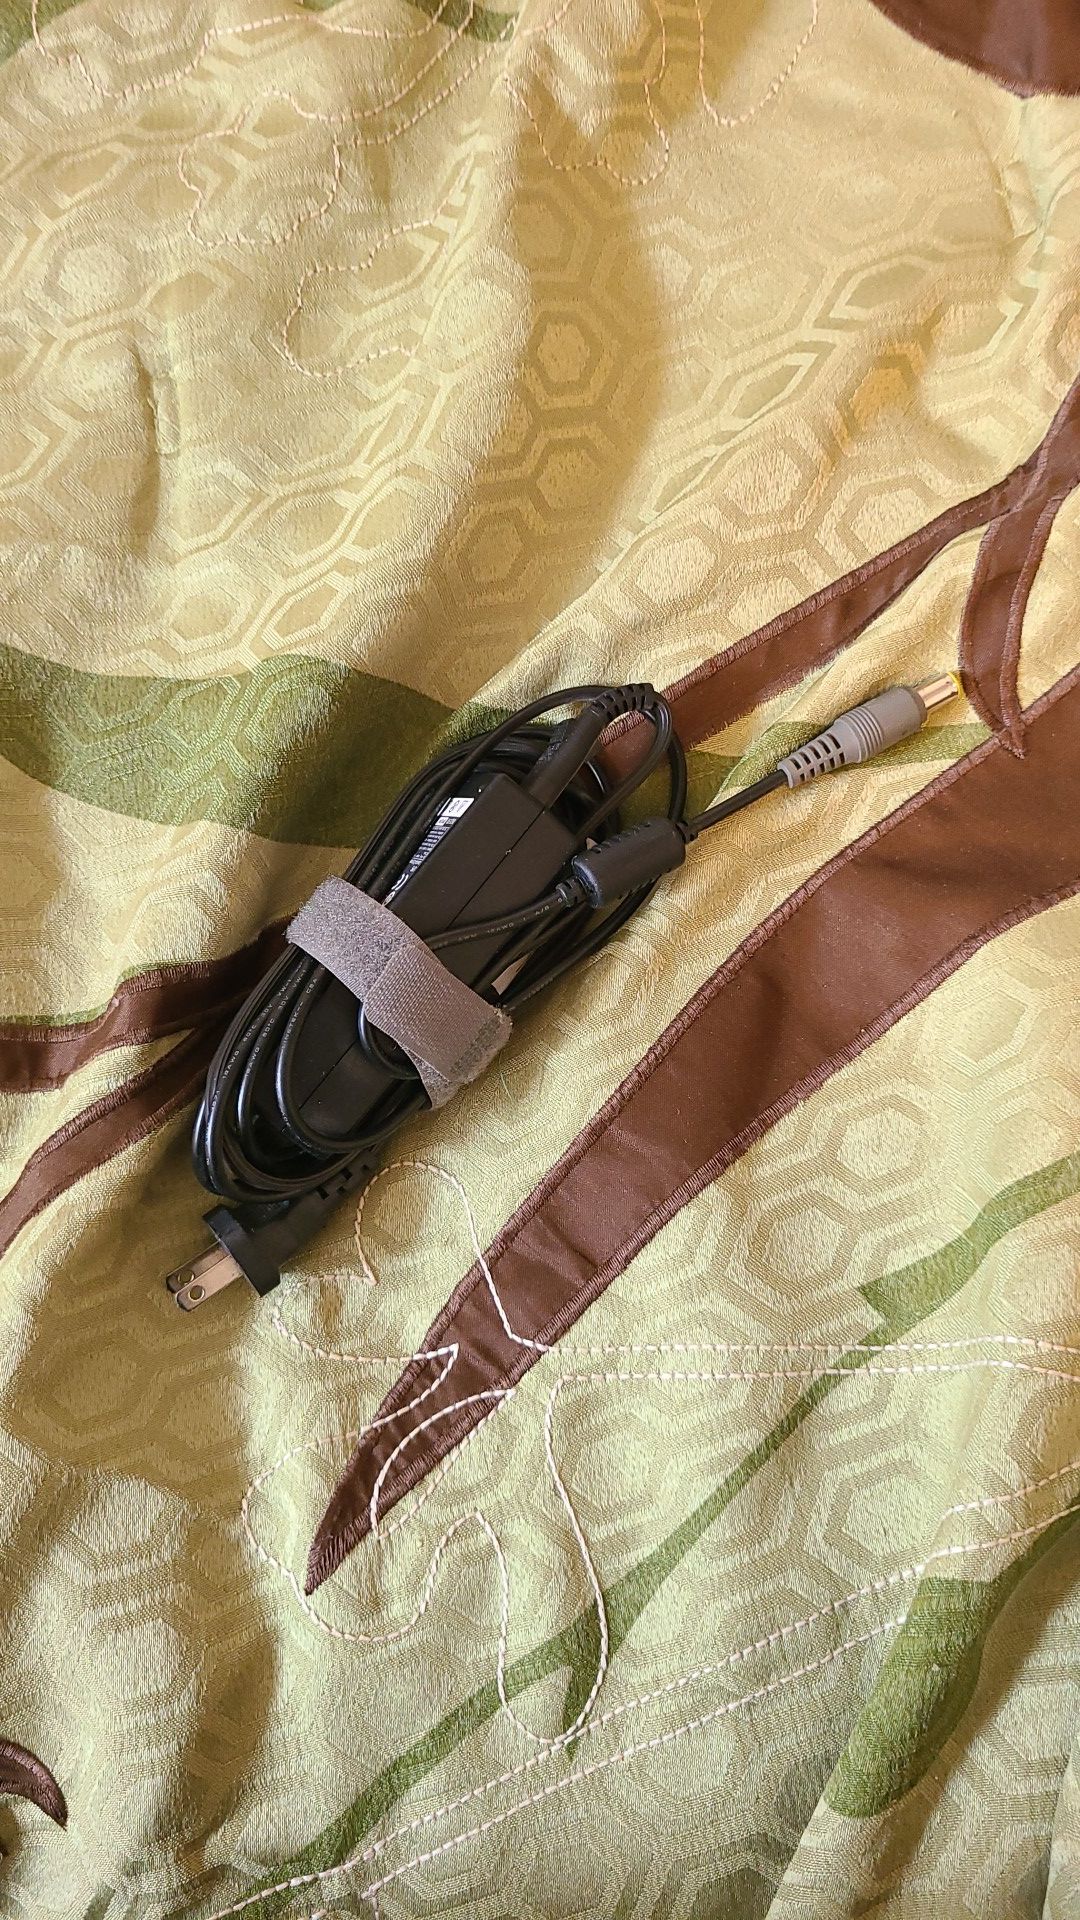 Lenovo,dell,asus laptop charger